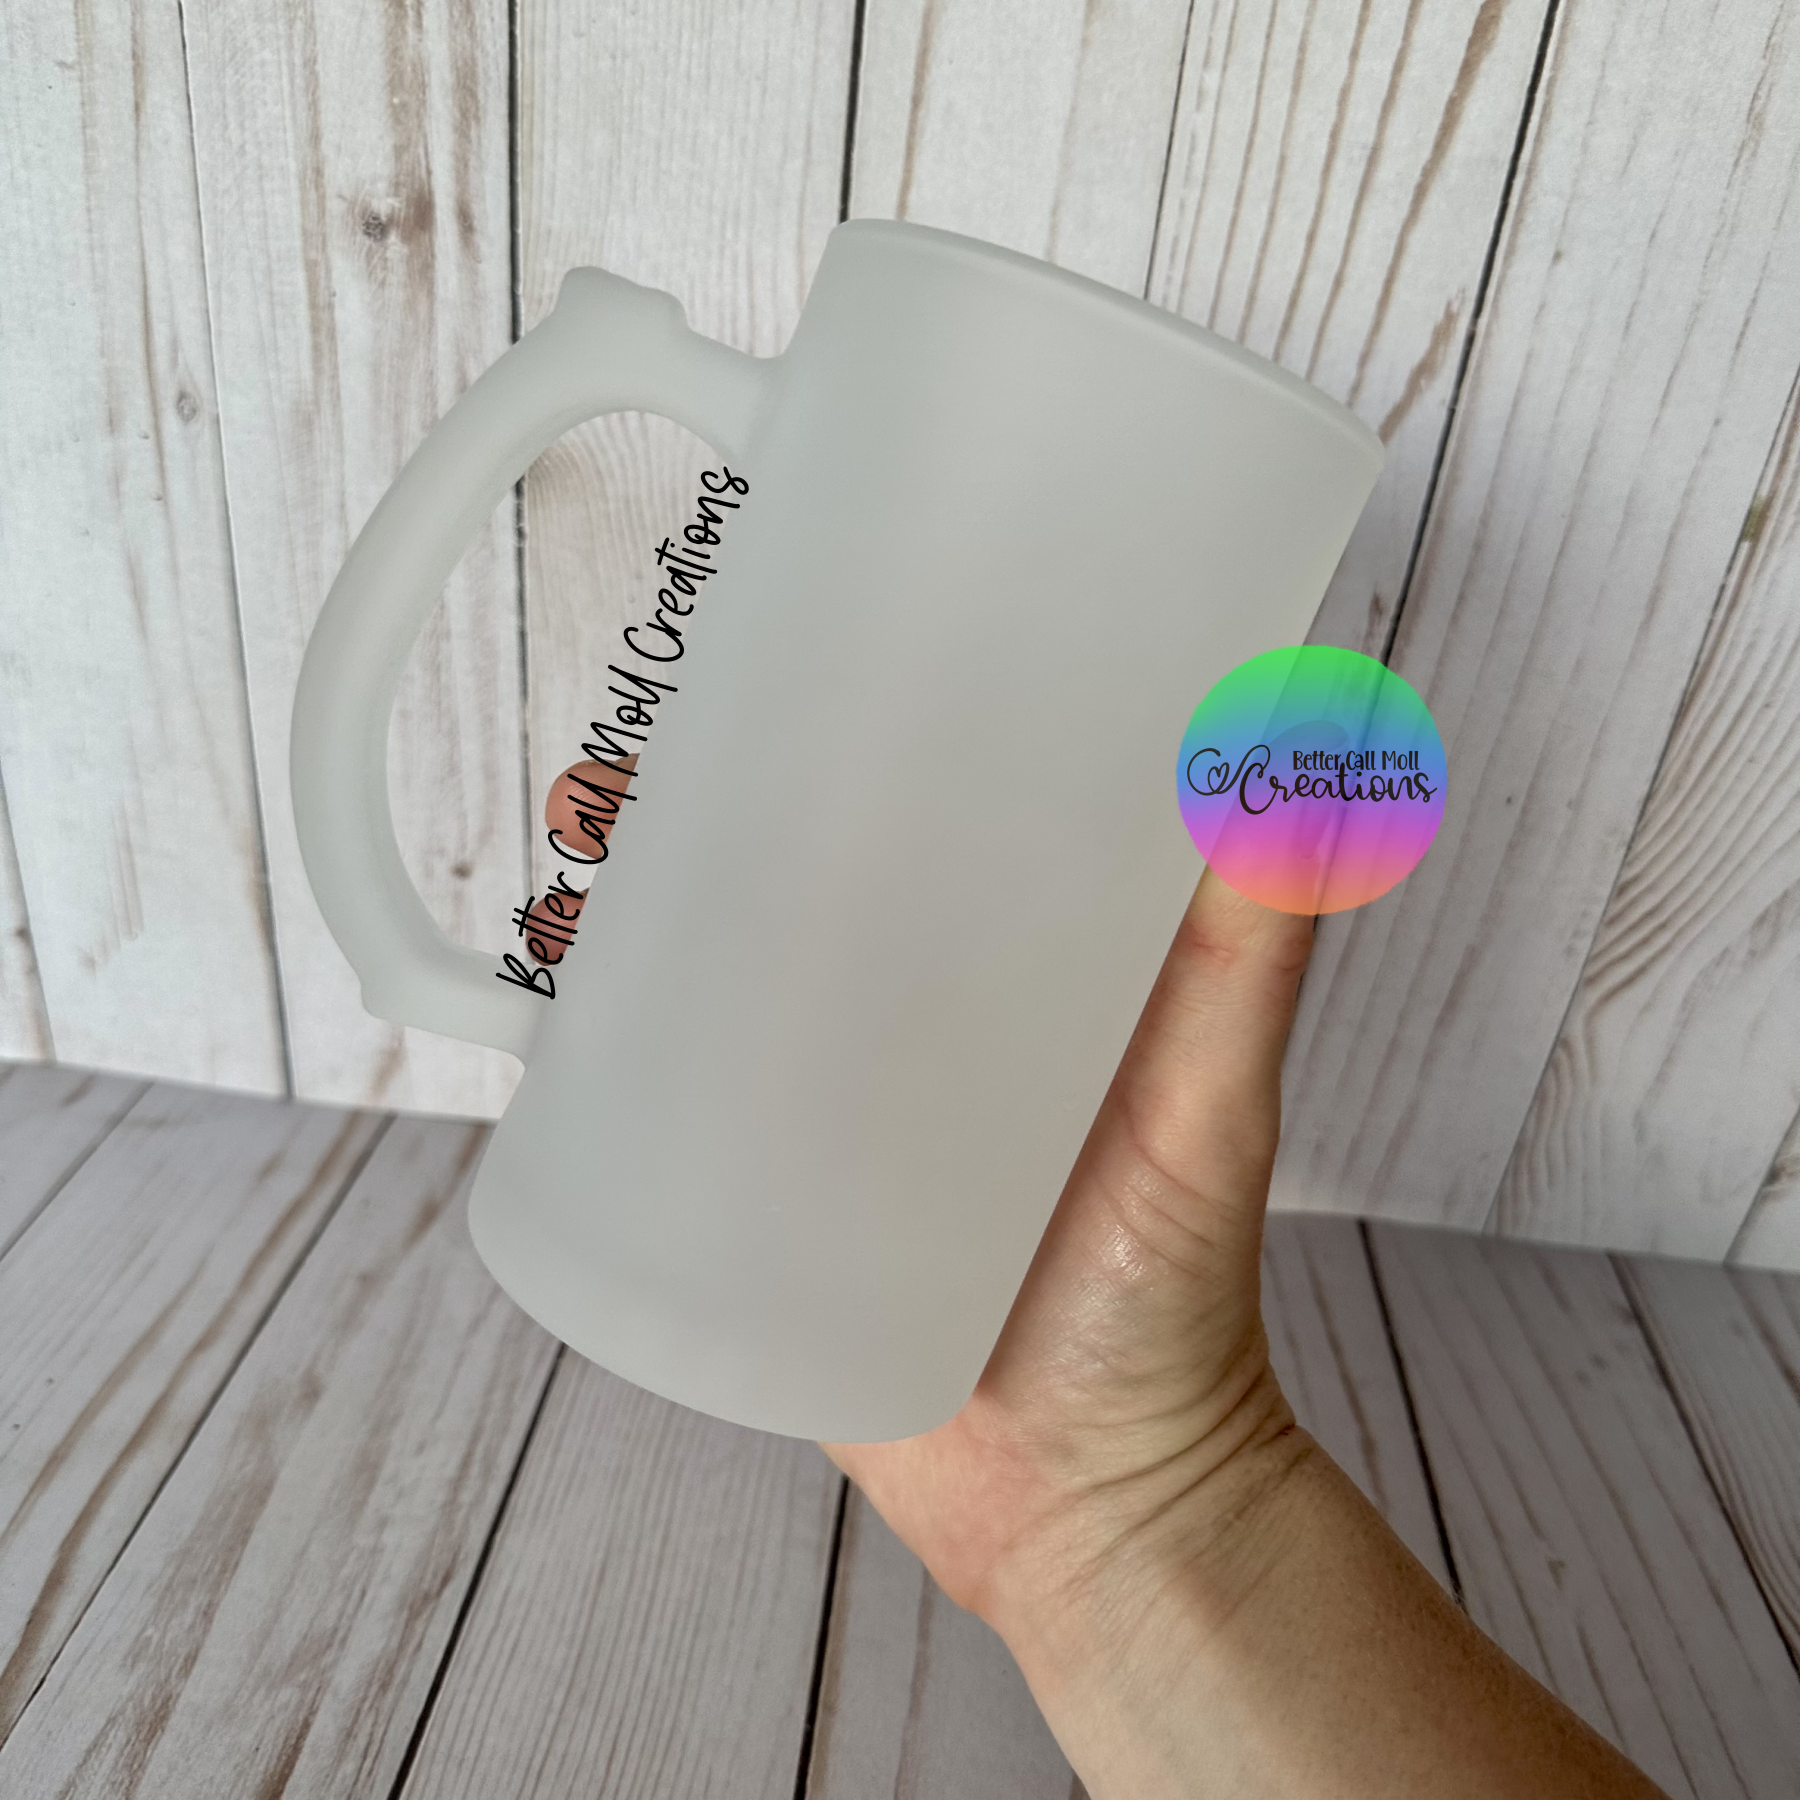 Sublimatable Frosted Glass Mug with Handle